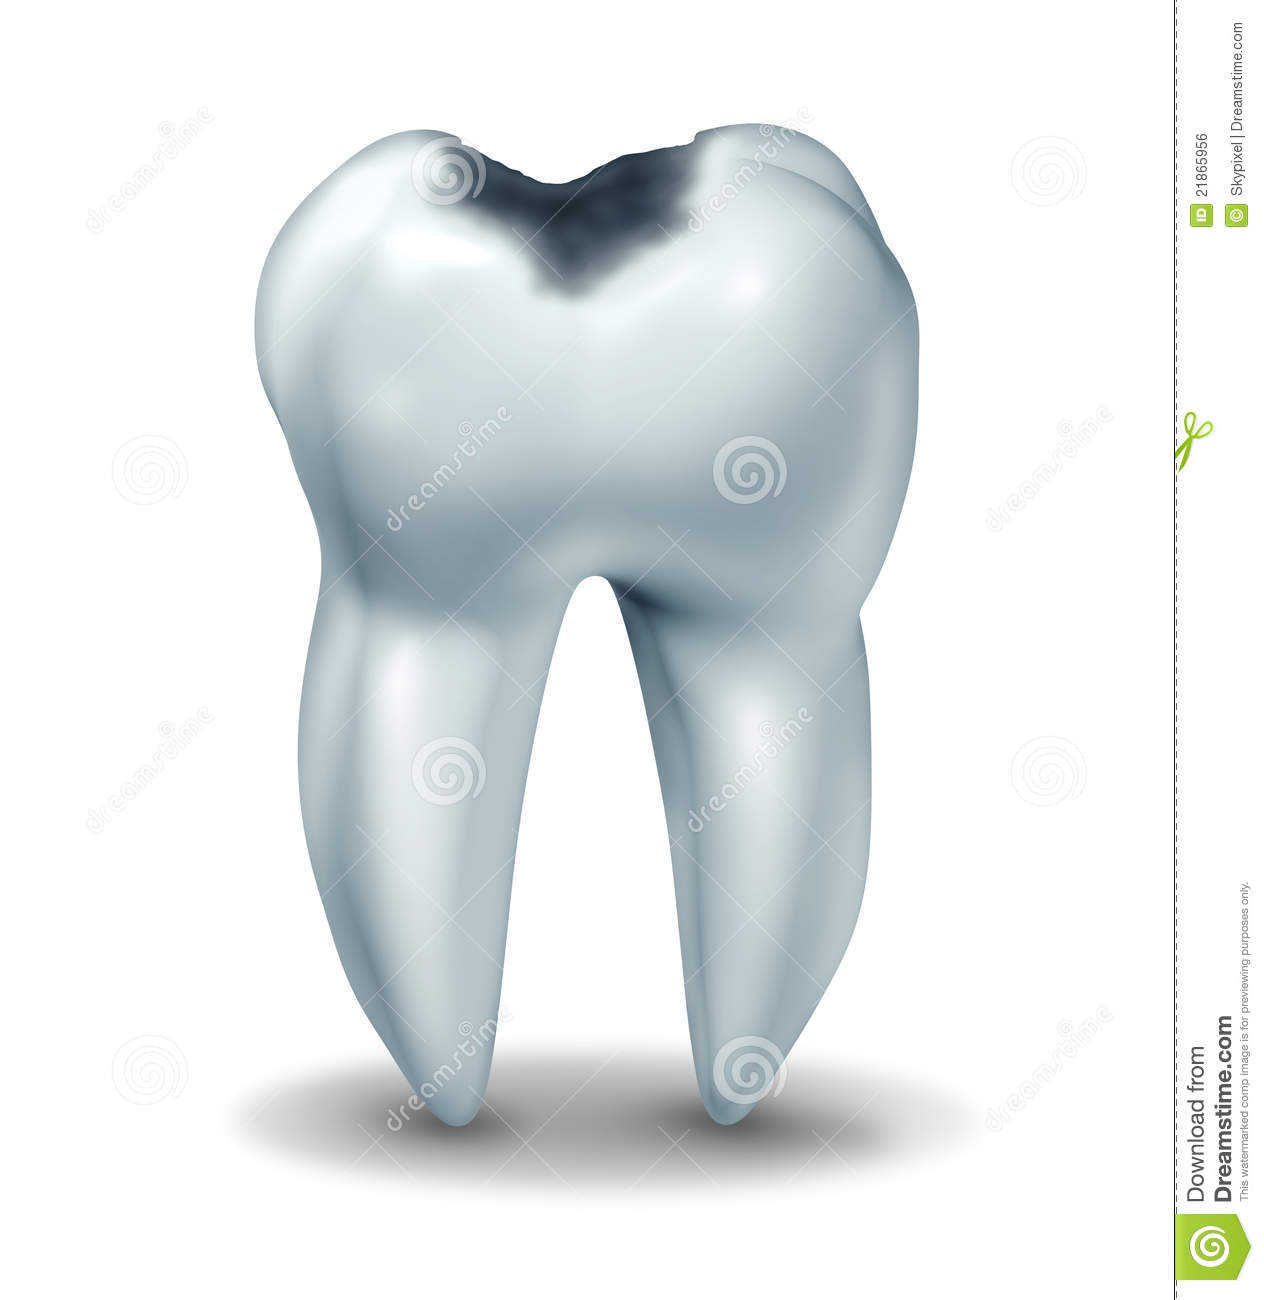 Symbol Showing The Medical Anatomy Of Teeth With A Cavity In Decay Due